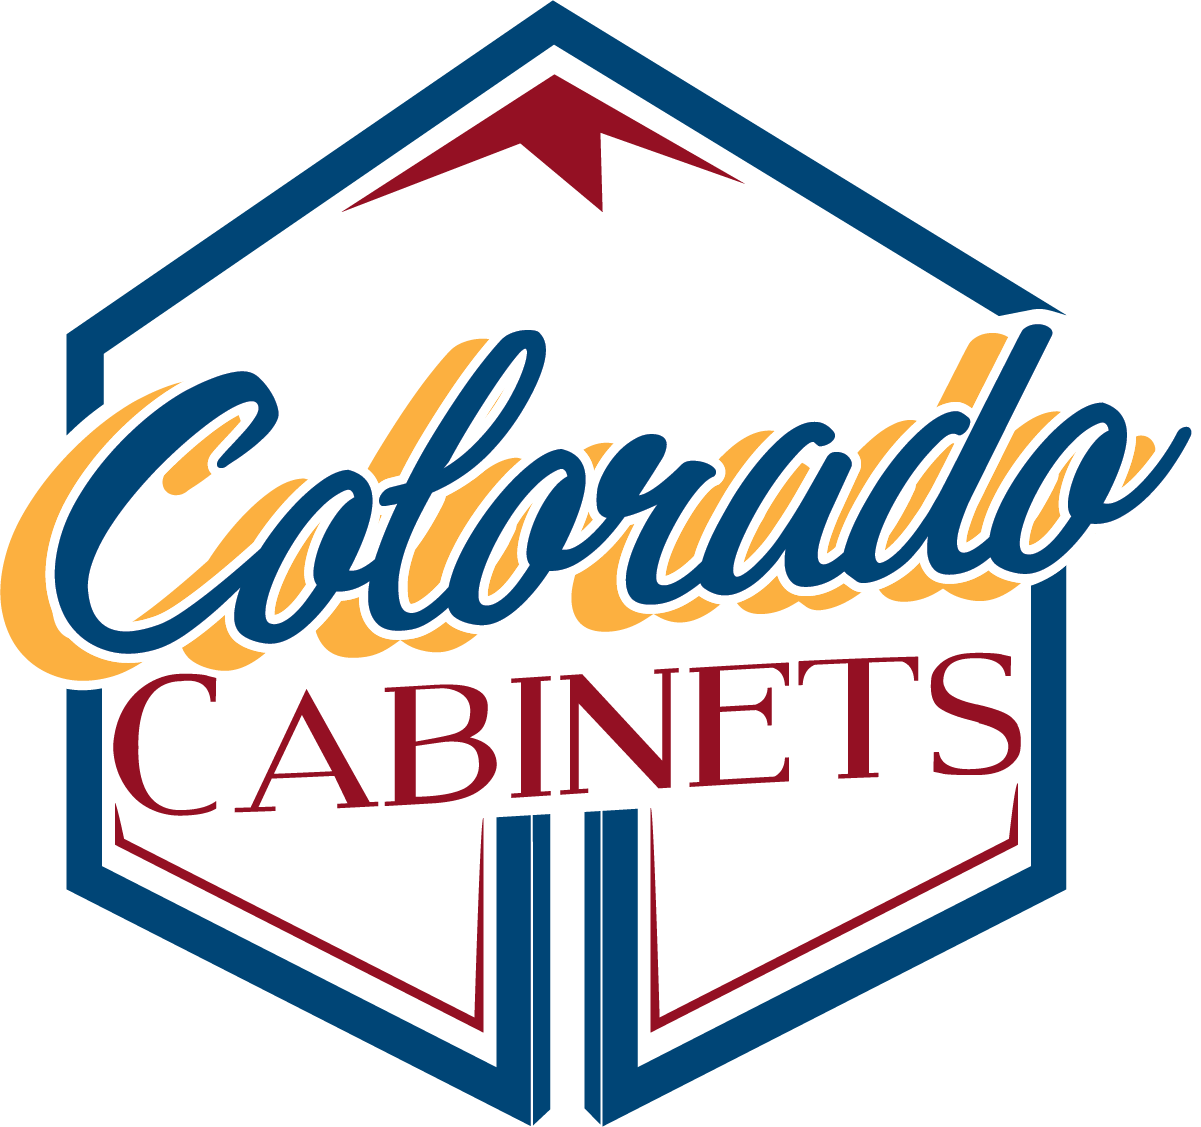 CO_Cabinets_logo_final.png